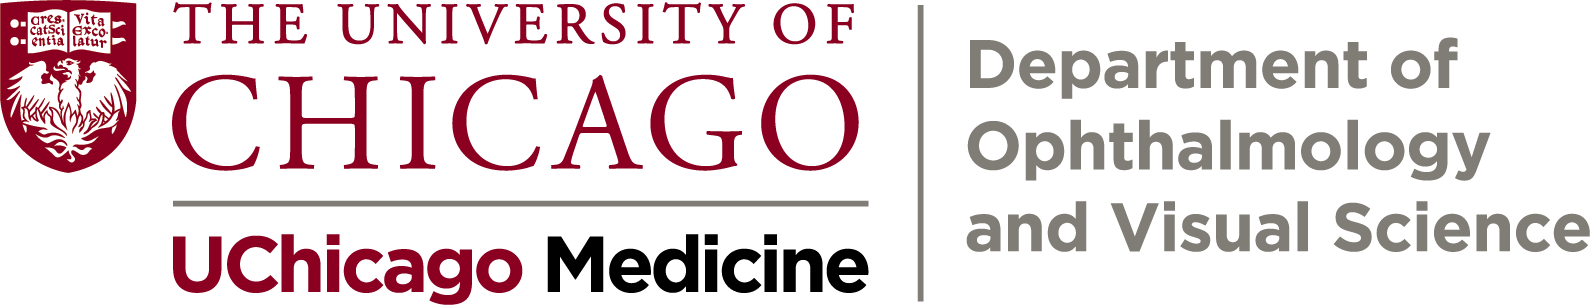 University of Chicago Medicine Department of Ophthalmology and Visual Science Logo